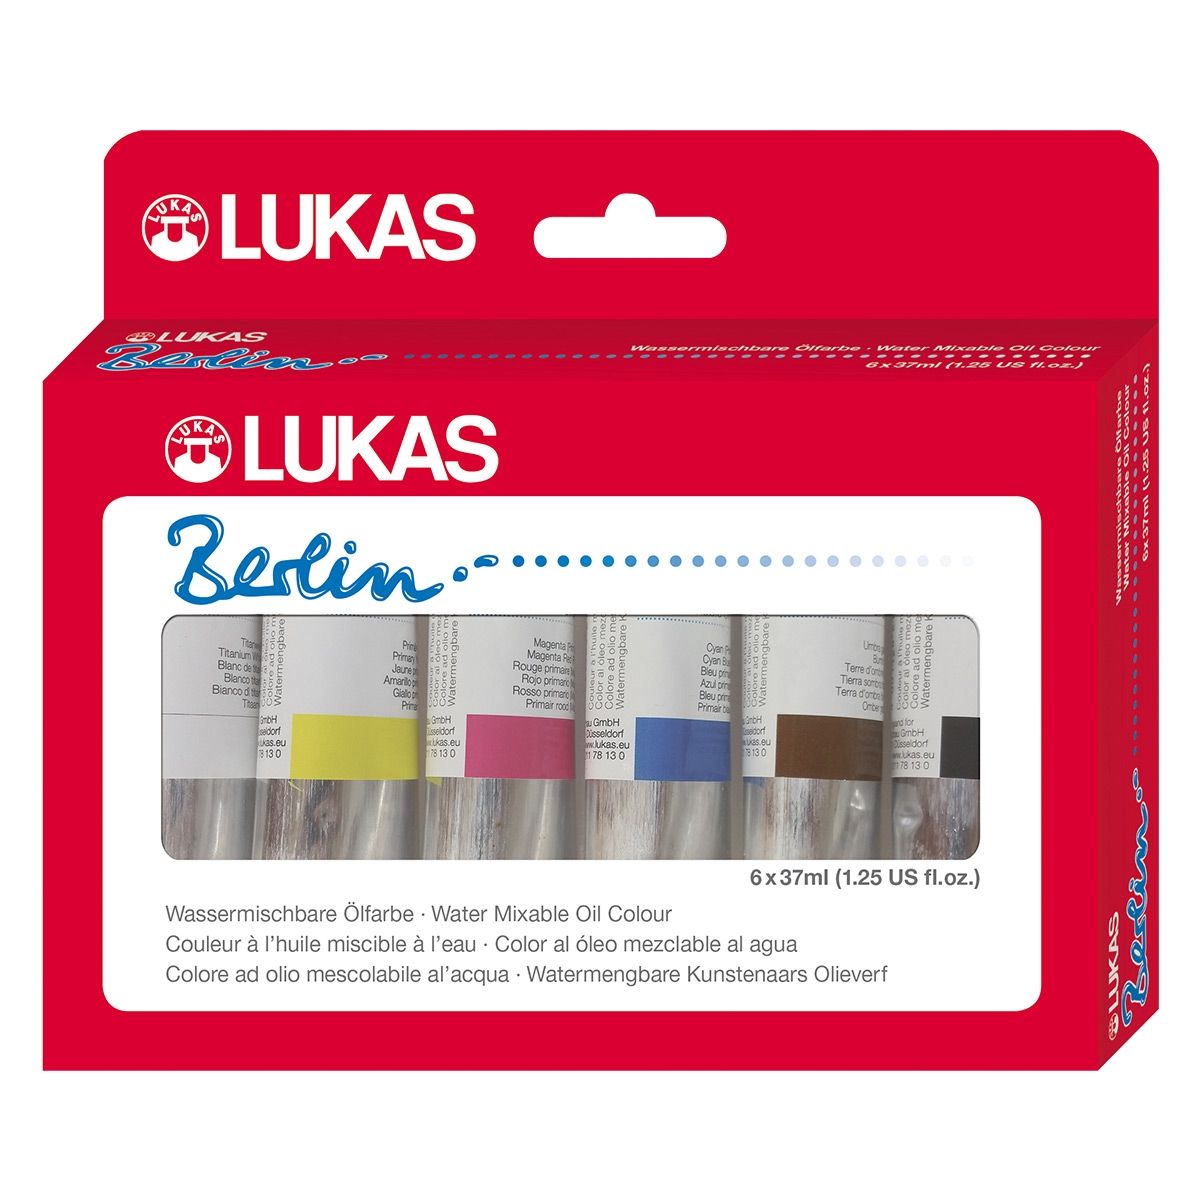 LUKAS Berlin Water-Mixable Oil Colors Starter Set of 6 - 37ml